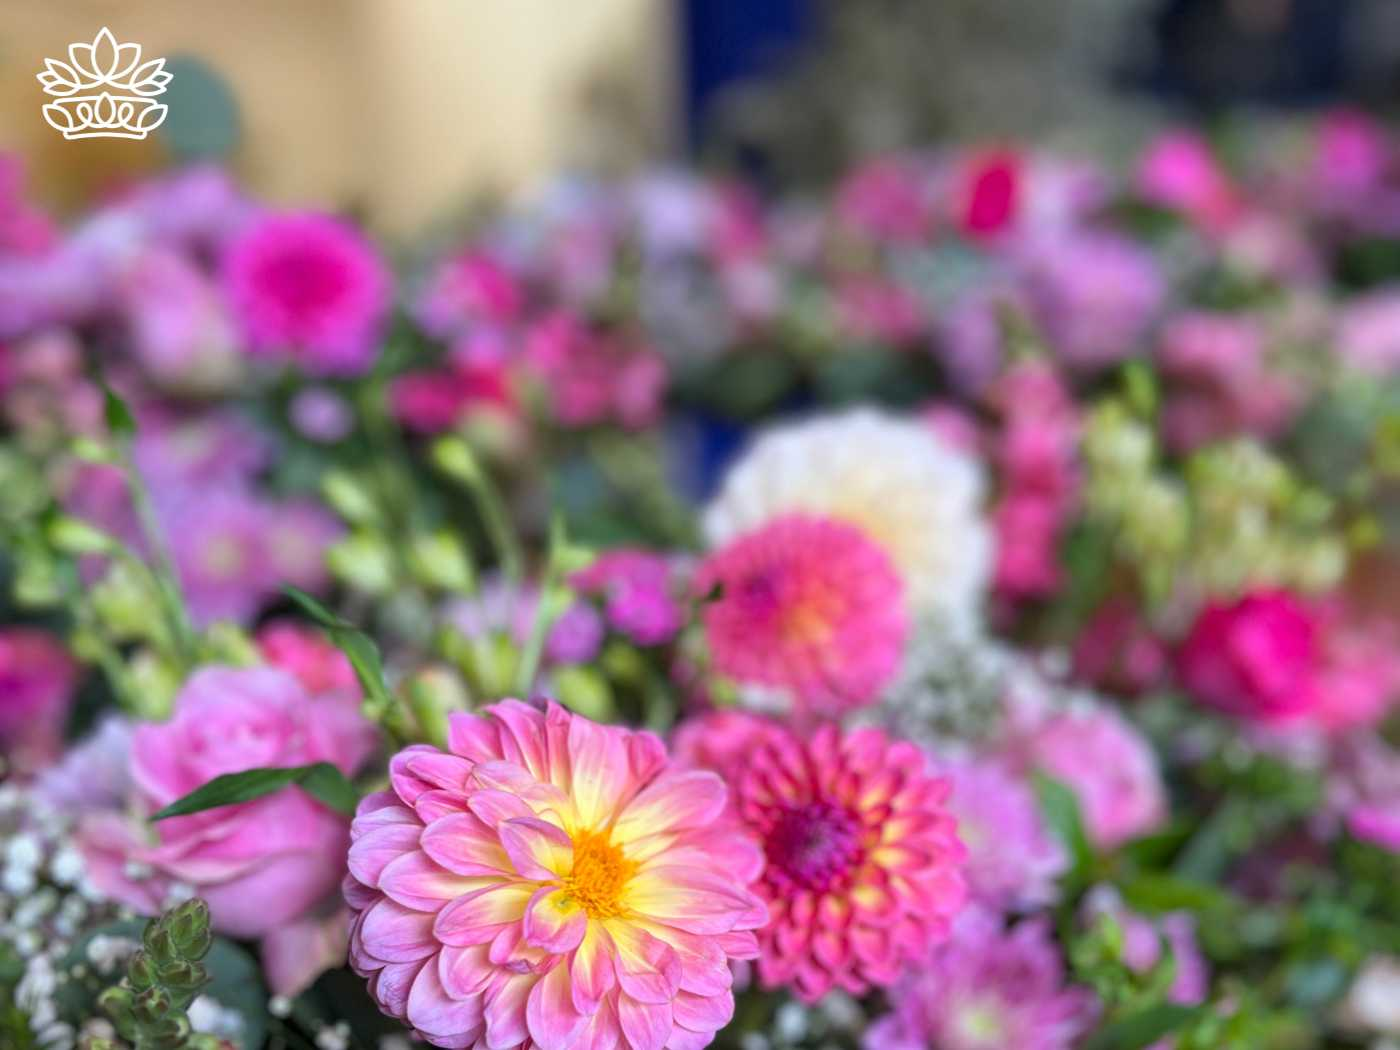 A delightful array of fresh pink dahlias and roses in soft focus, symbolising the blooming beauty of Fabulous Flowers and Gifts